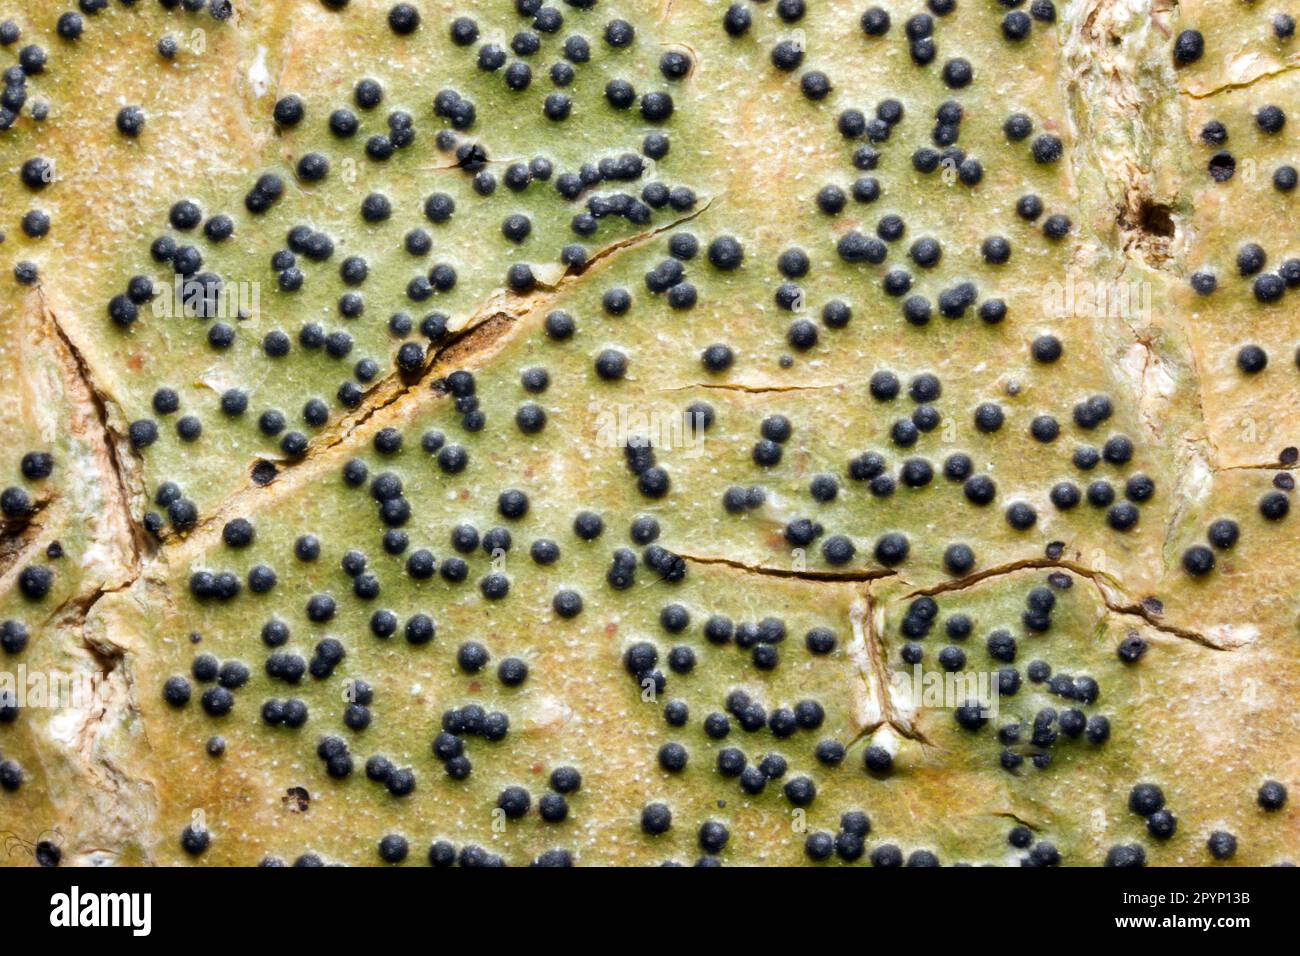 Pyrenula macrospora is common crustose lichen of smooth-barked trees. It has been recorded in Europe and Asia. Stock Photo